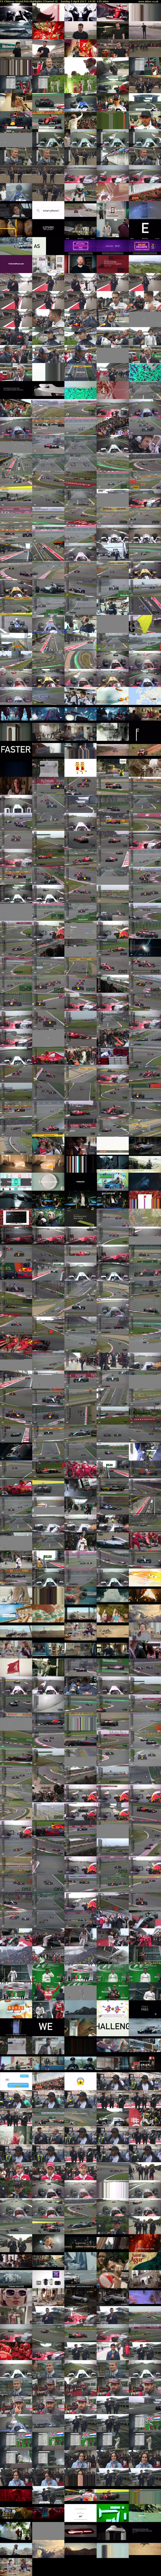 F1 Chinese Grand Prix Highlights (Channel 4) Sunday 9 April 2017 14:30 - 16:45